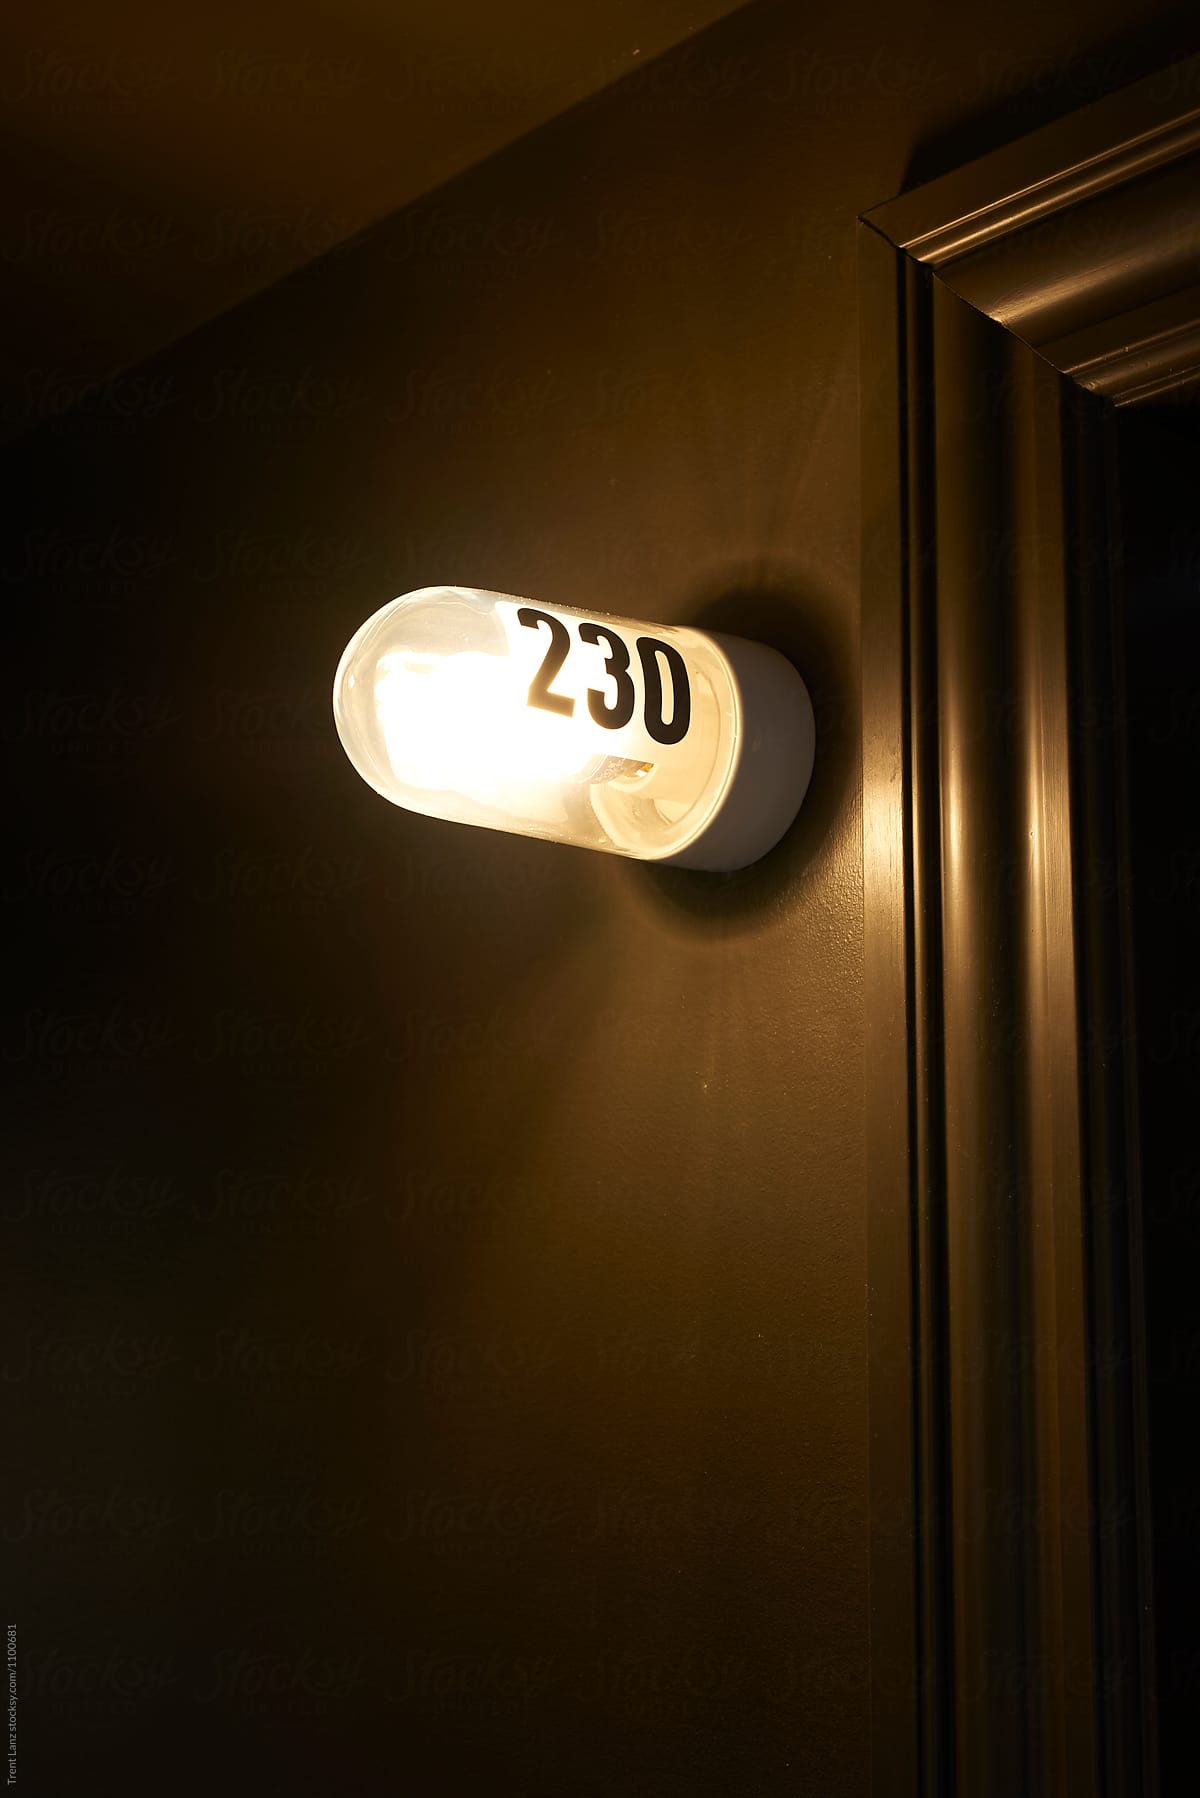 230 lamp sign on brown wall